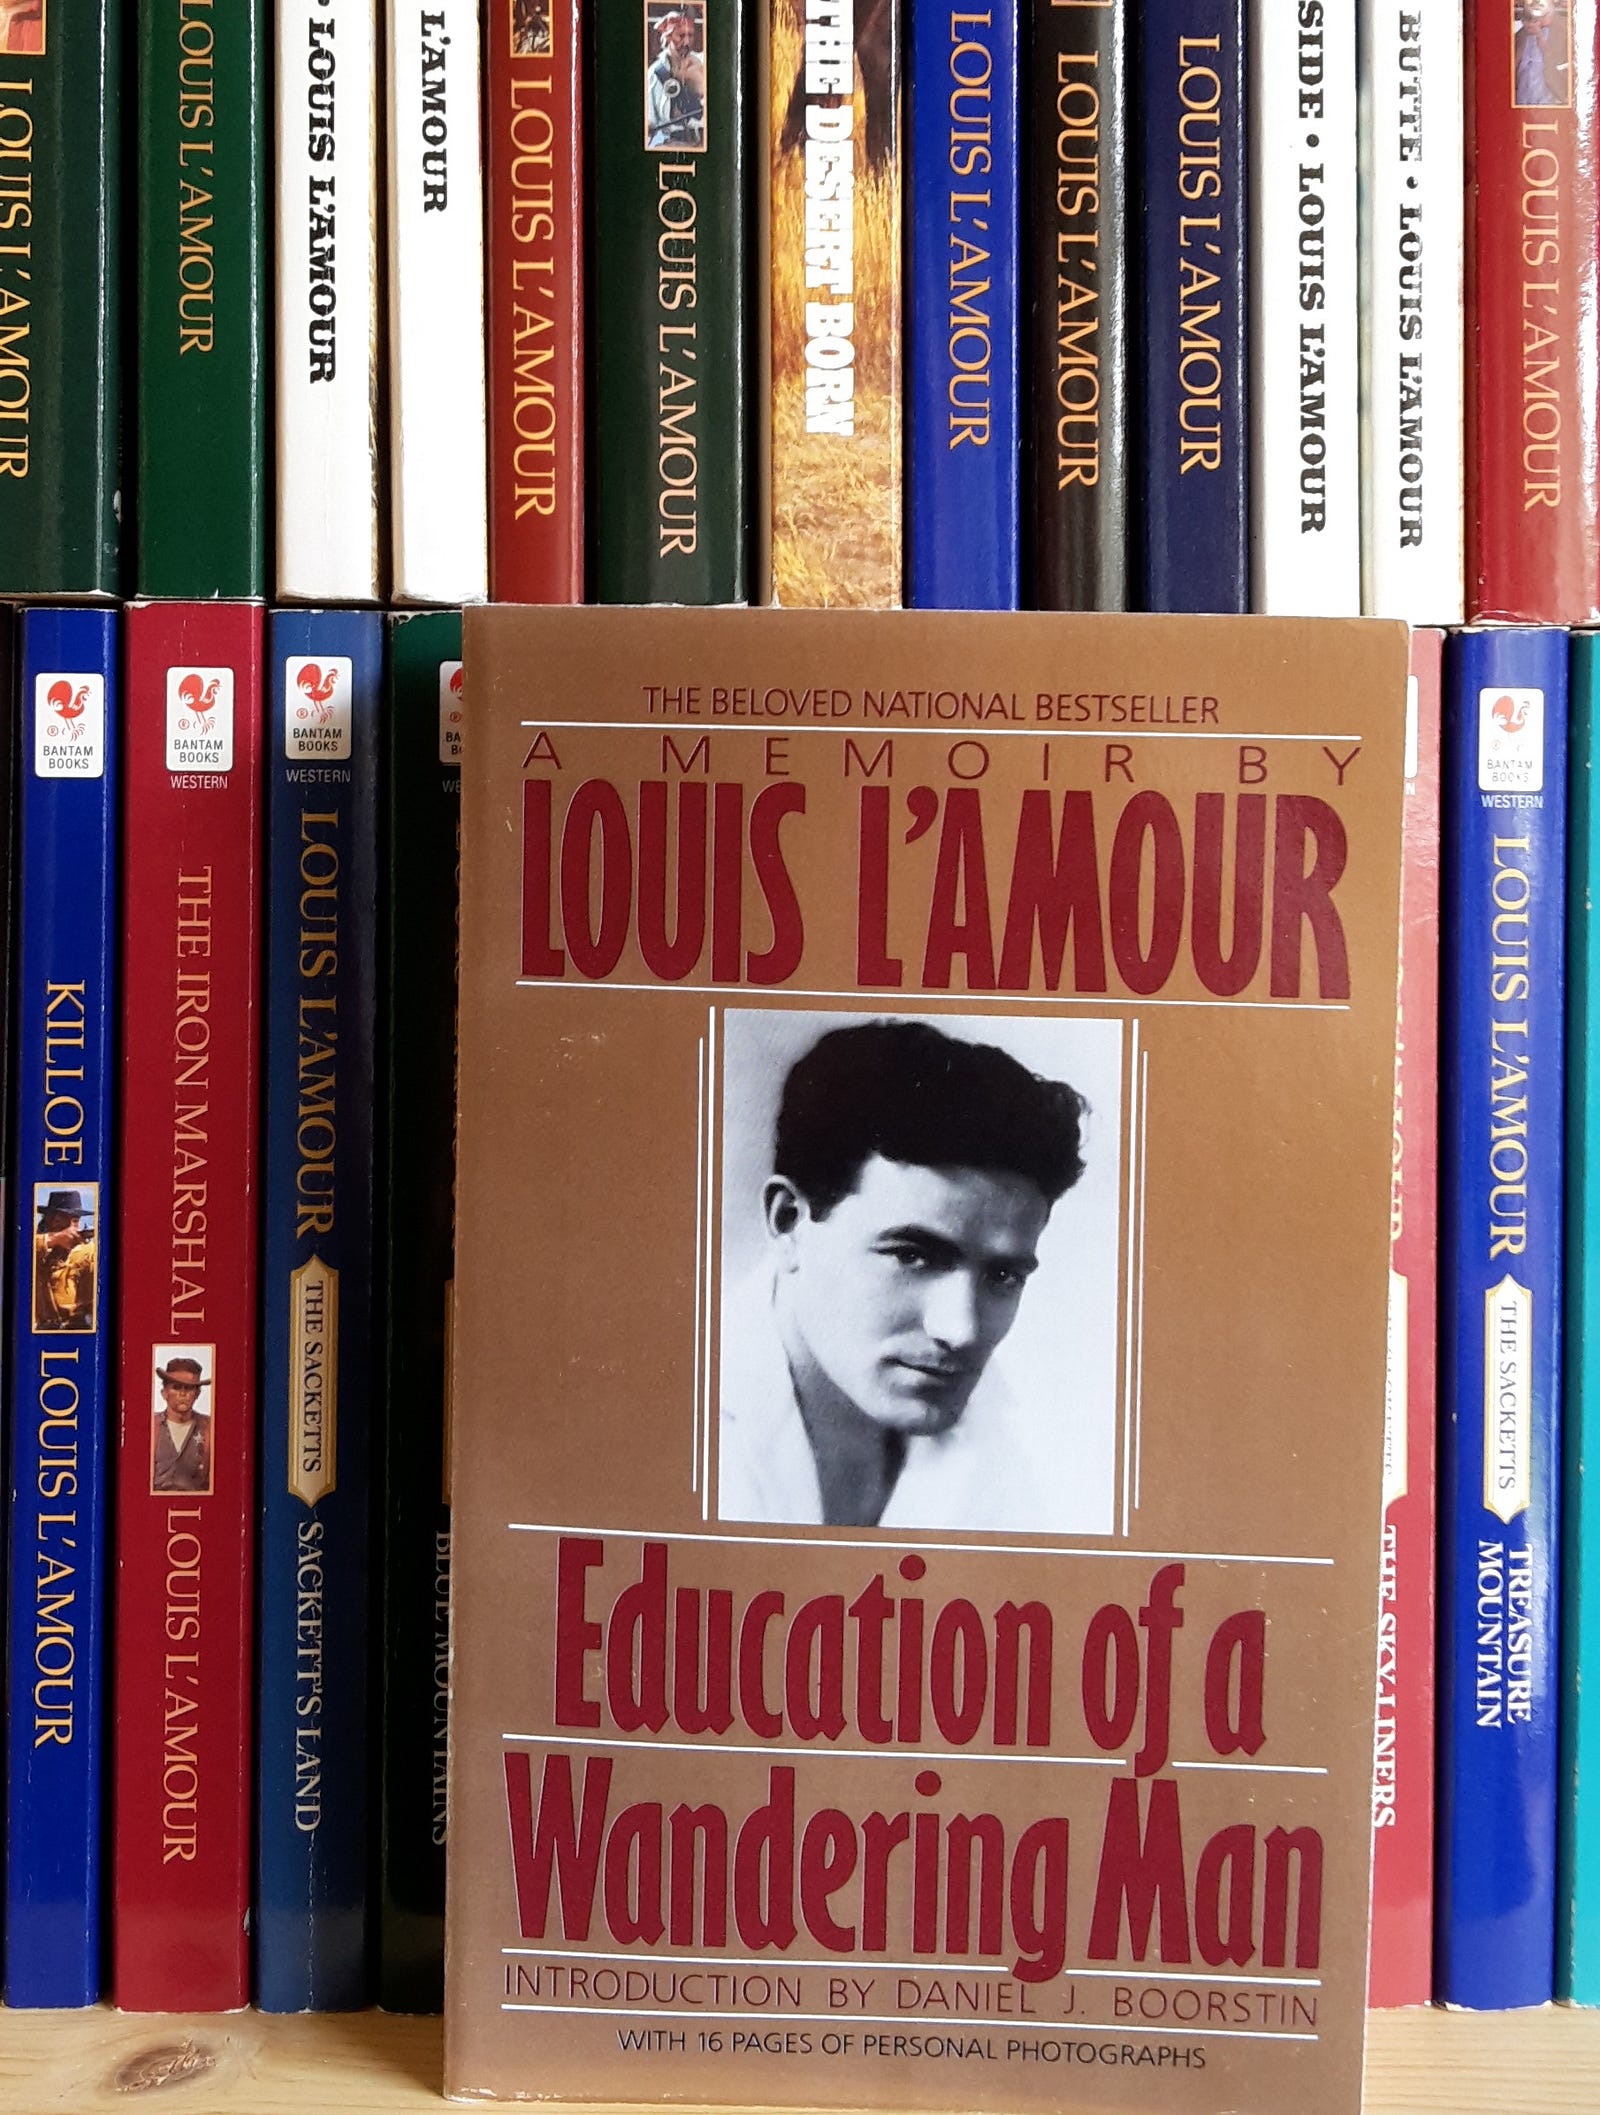 10 Lessons Writers Can Learn From Louis L’Amour – The Writing Cooperative